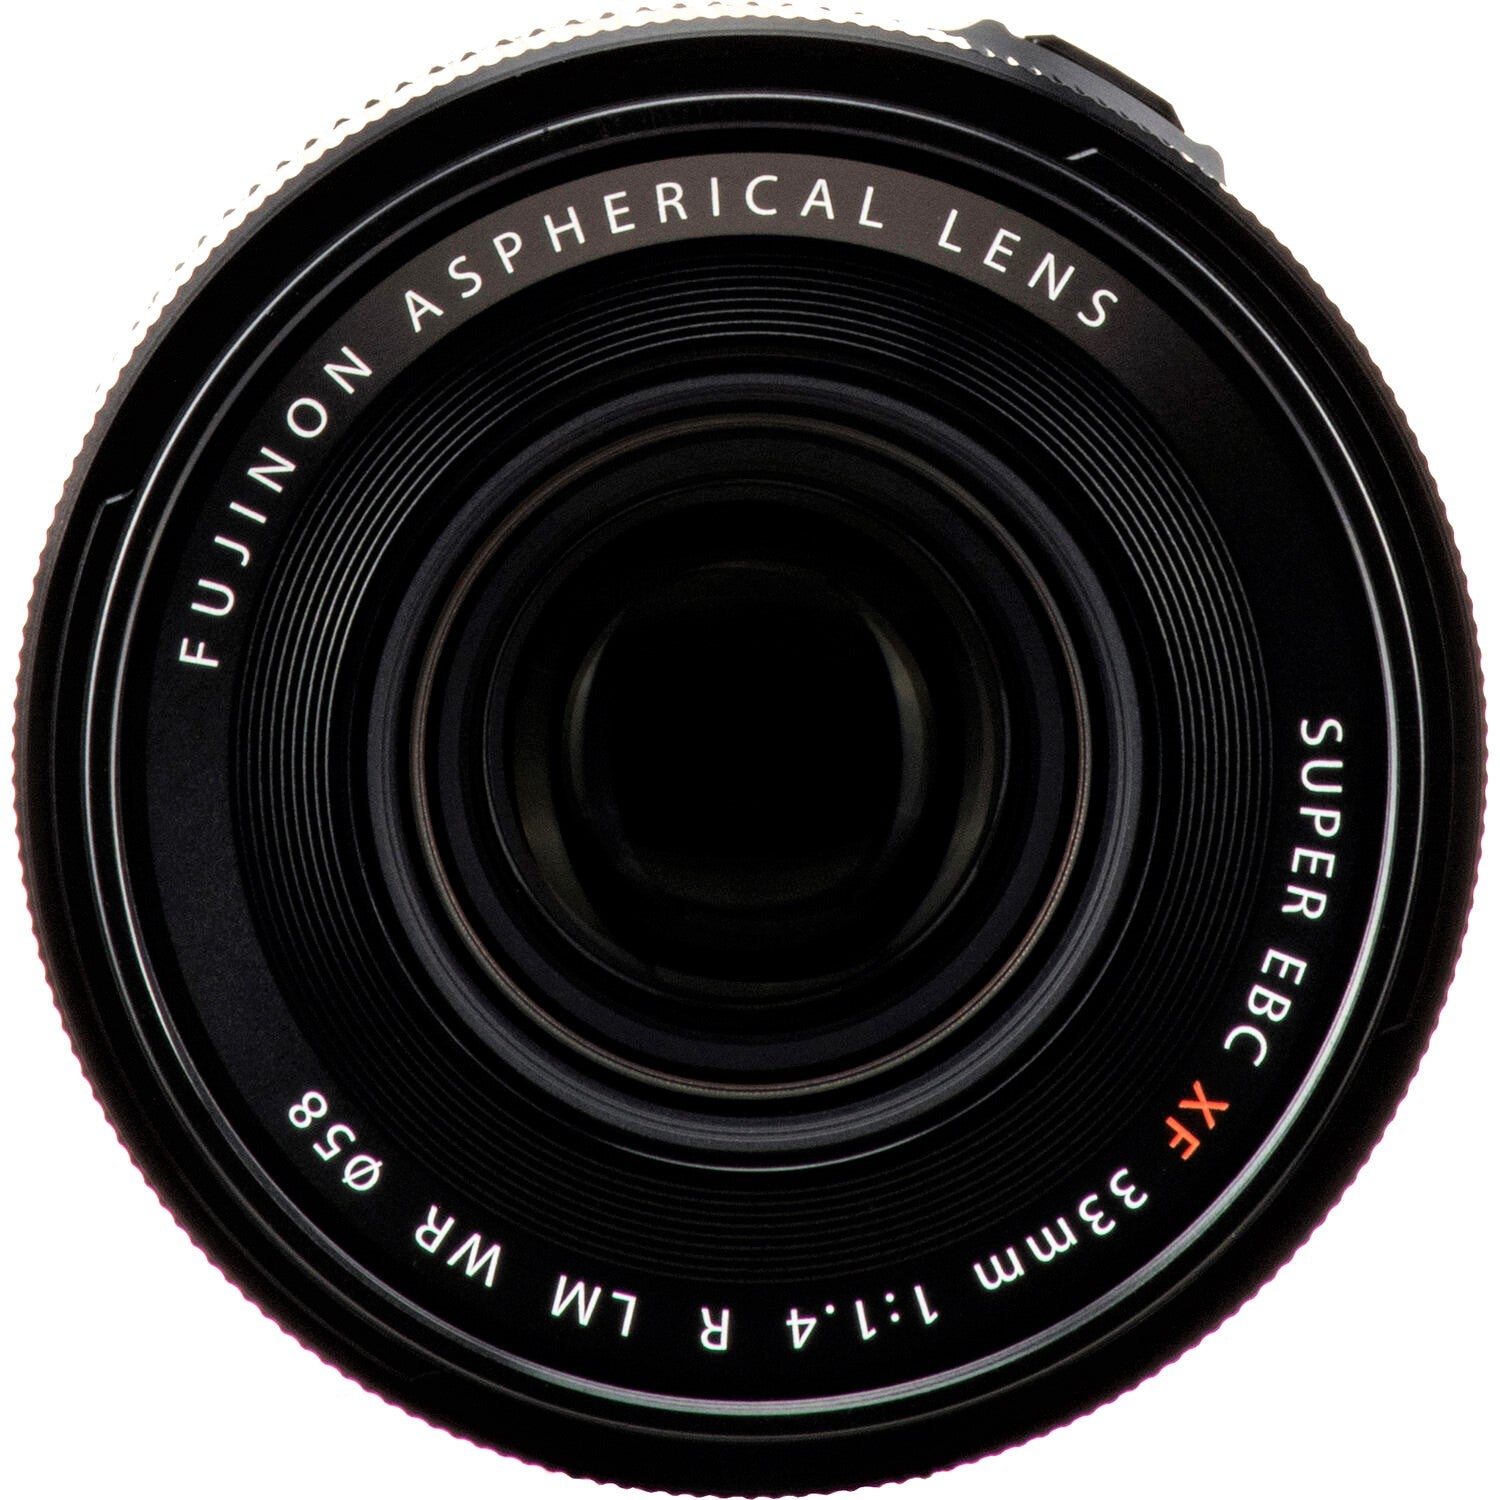 FUJIFILM XF 33mm f/1.4 R LM WR Lens - Front View